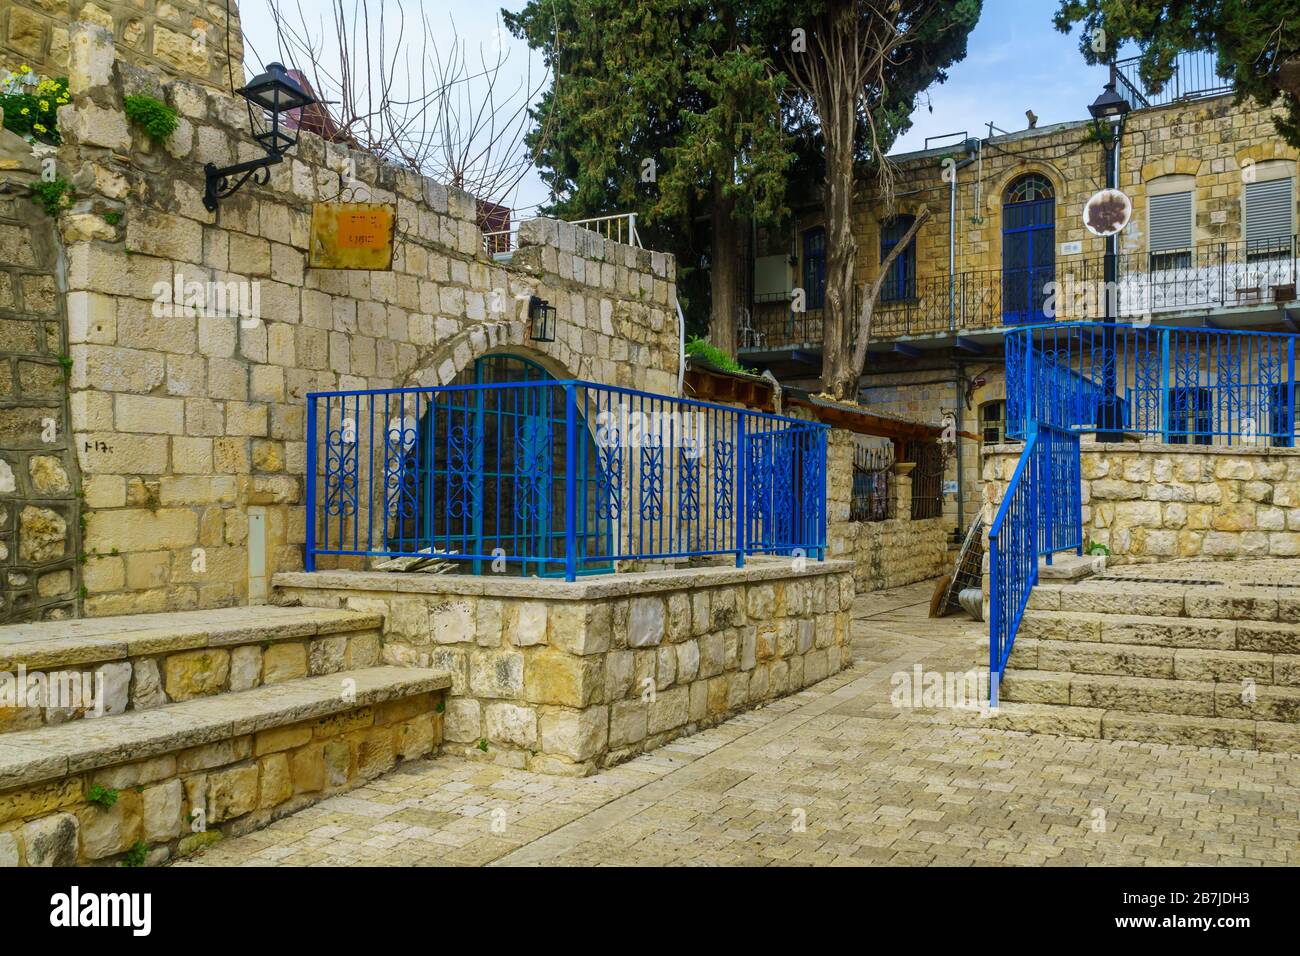 Safed, Israel - March 10, 2020: View of an alley in the Artists Quarter of the old city of Safed (Tzfat), Israel Stock Photo